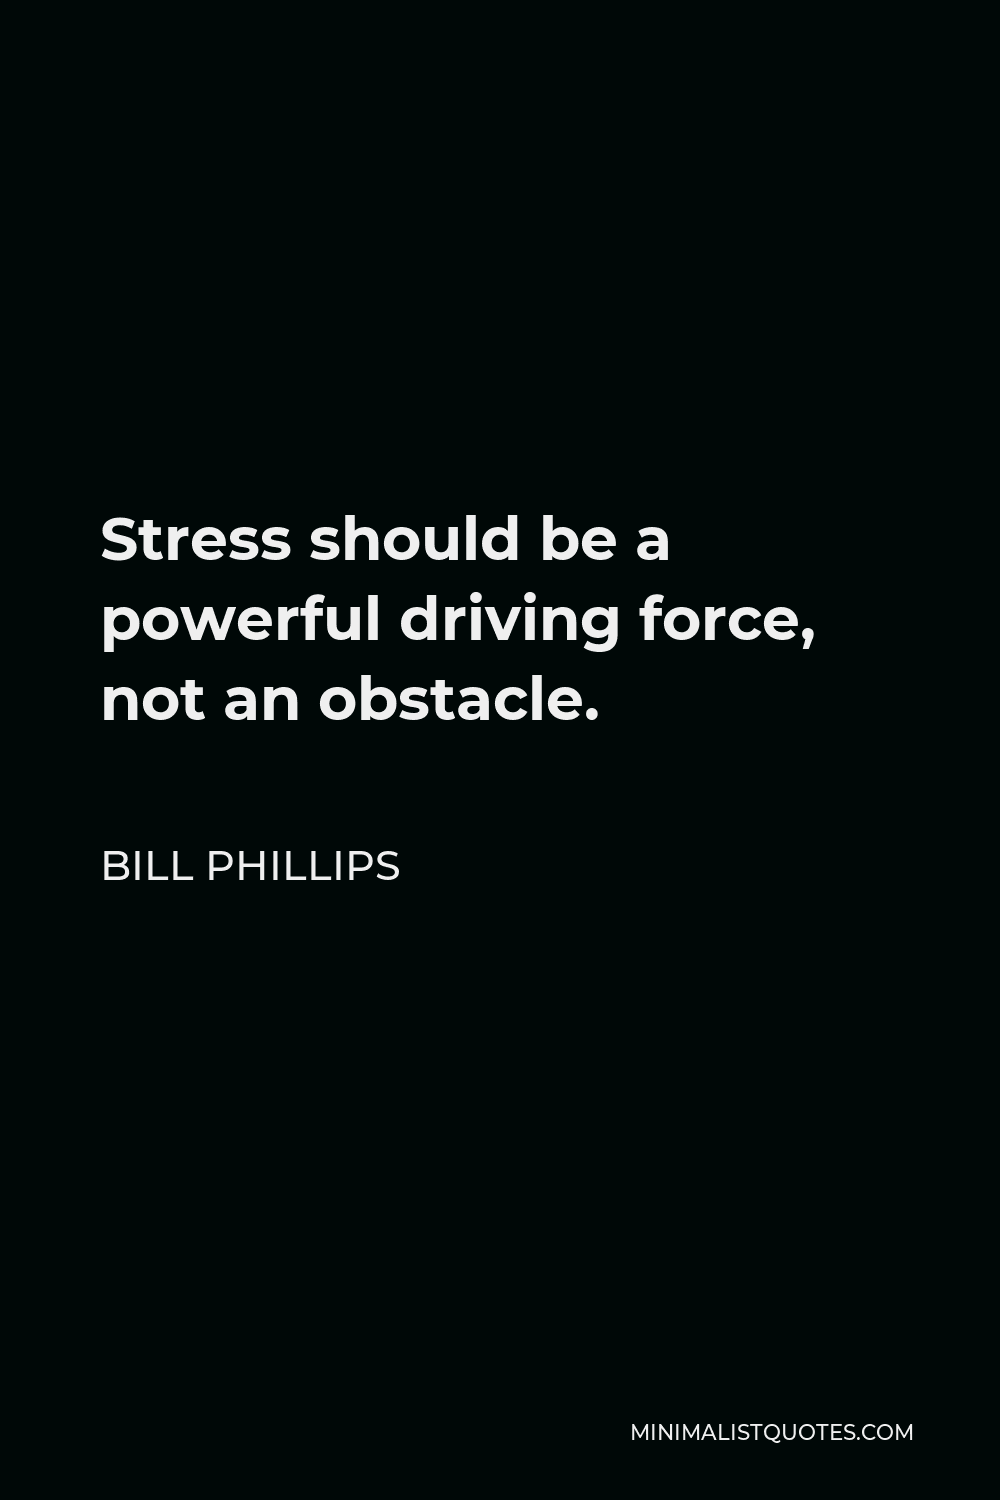 Bill Phillips Quote - Stress should be a powerful driving force, not an obstacle.